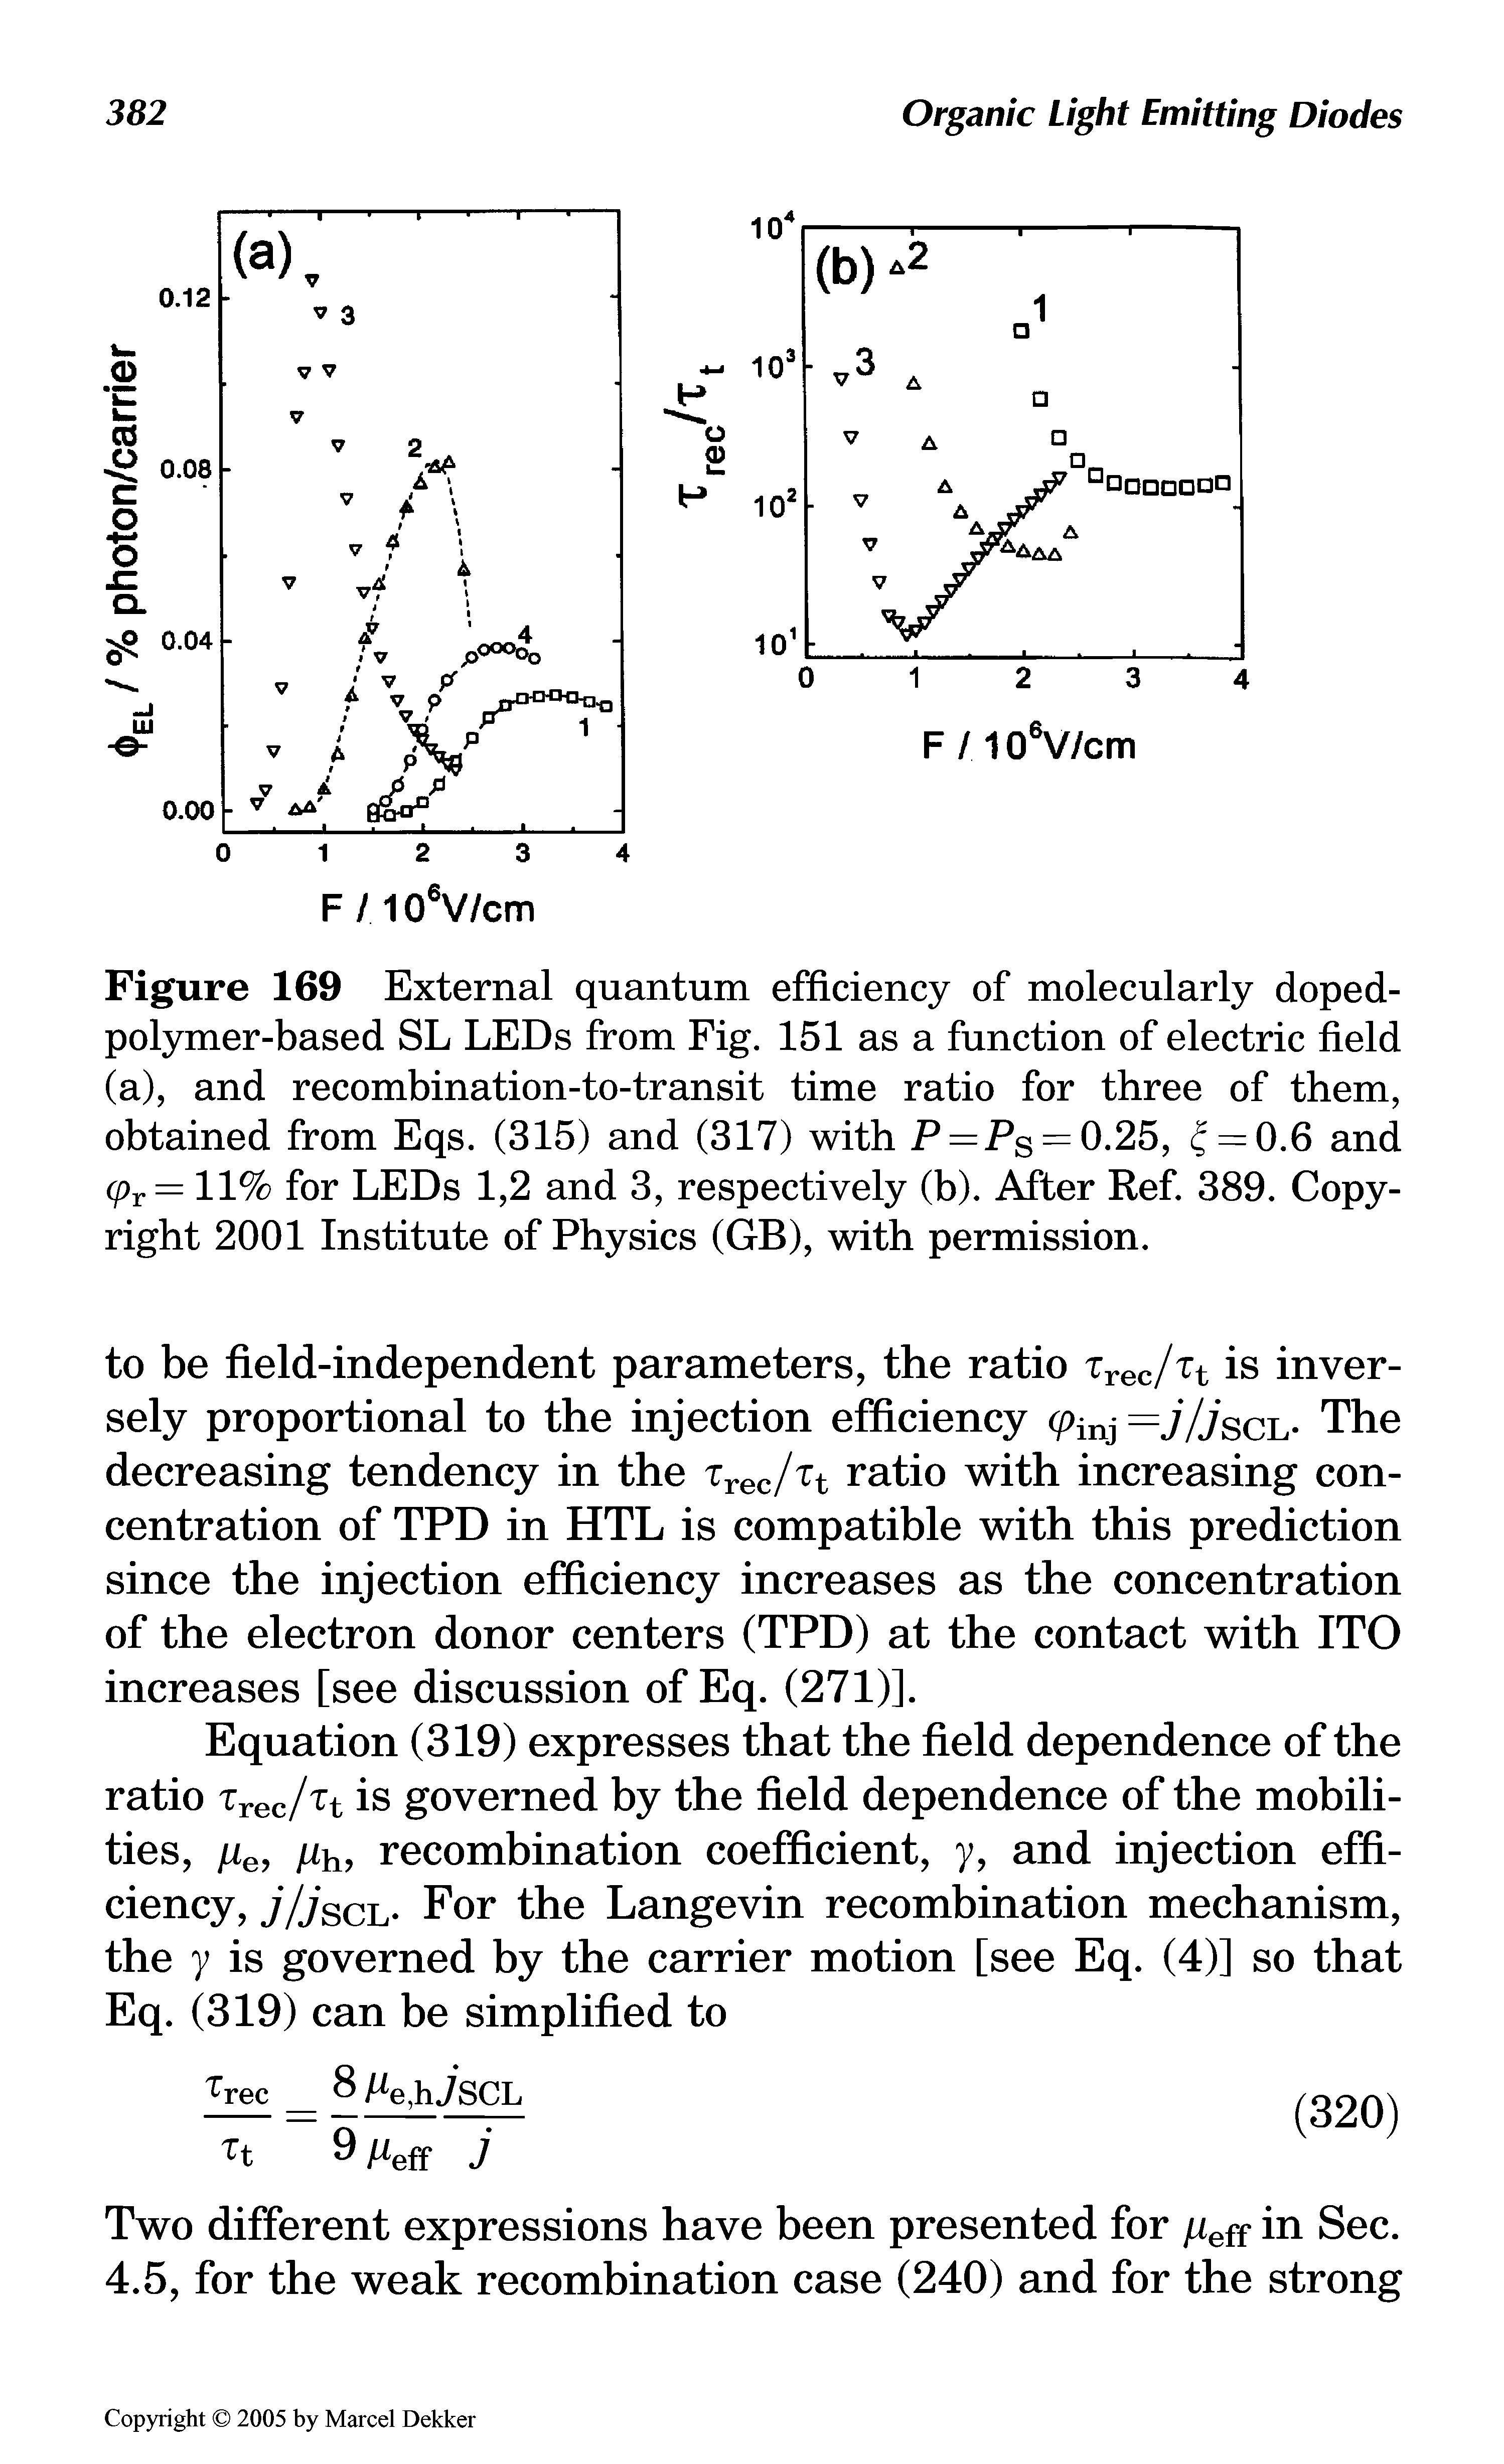 Figure 169 External quantum efficiency of molecularly doped-polymer-based SL LEDs from Fig. 151 as a function of electric field (a), and recombination-to-transit time ratio for three of them, obtained from Eqs. (315) and (317) with P = Ps = 0.25, = 0.6 and (pT = 11% for LEDs 1,2 and 3, respectively (b). After Ref. 389. Copyright 2001 Institute of Physics (GB), with permission.